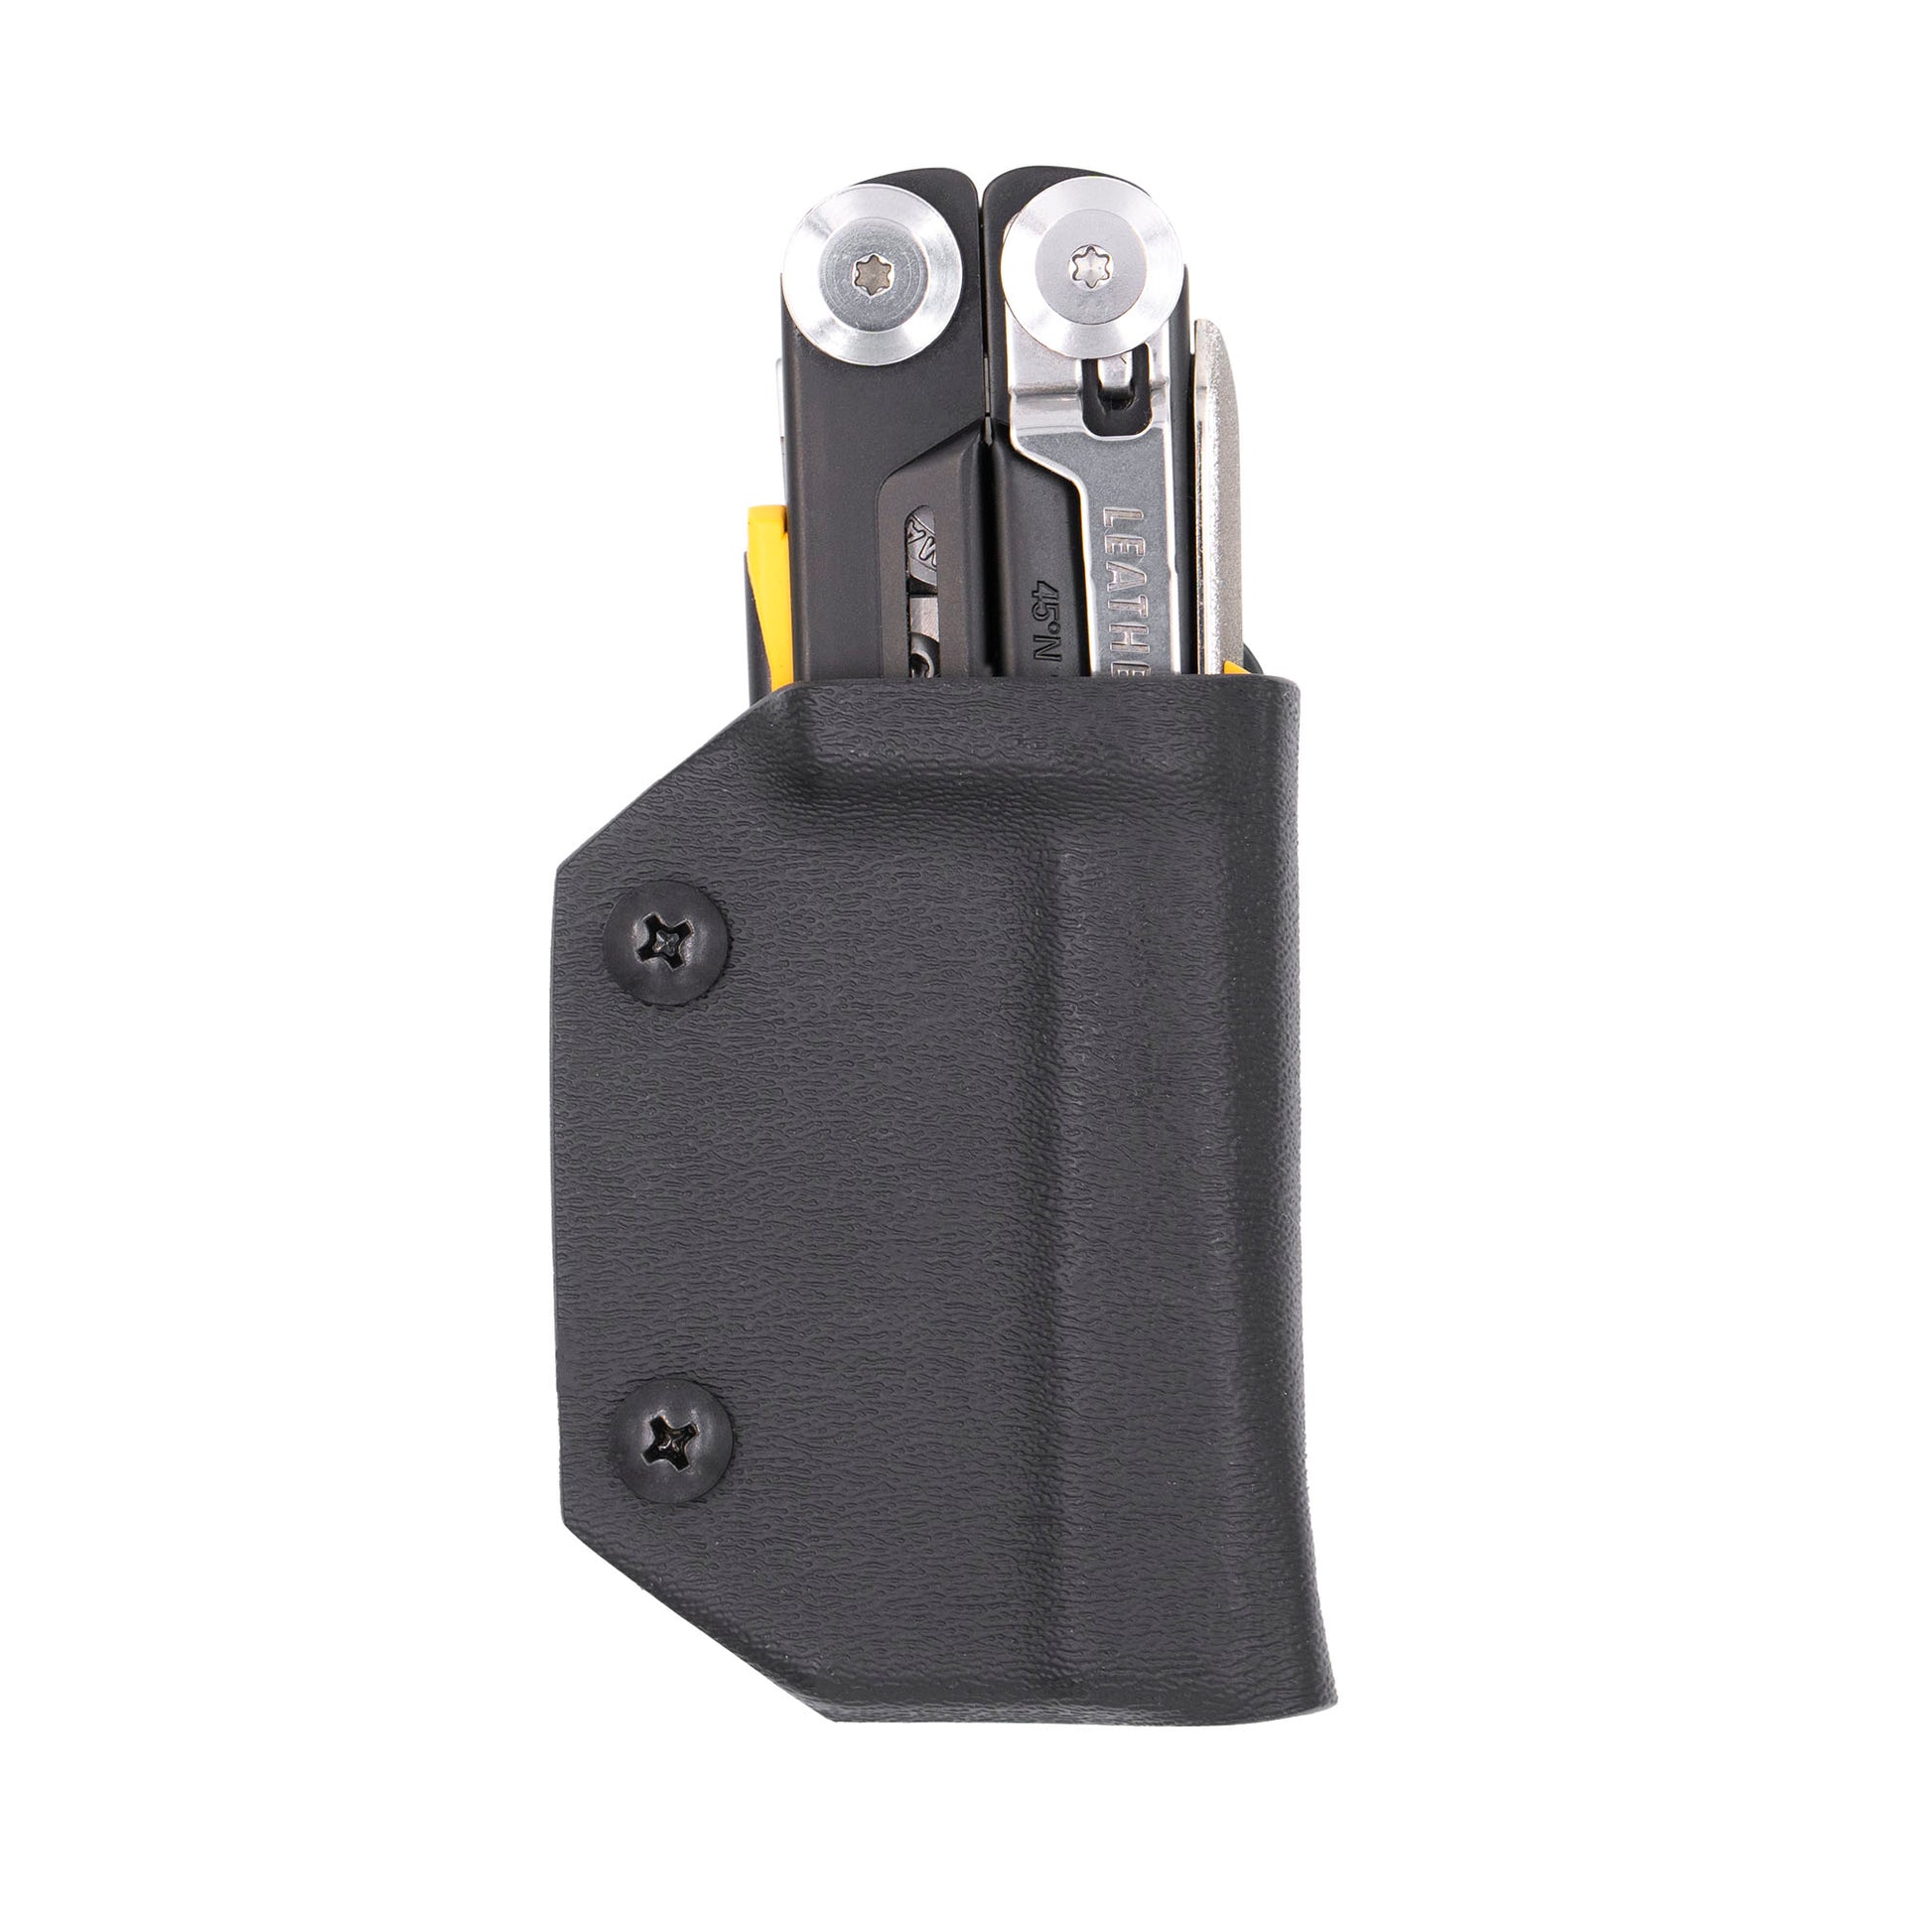 Kydex Sheath for the Leatherman Signal Clip & Carry